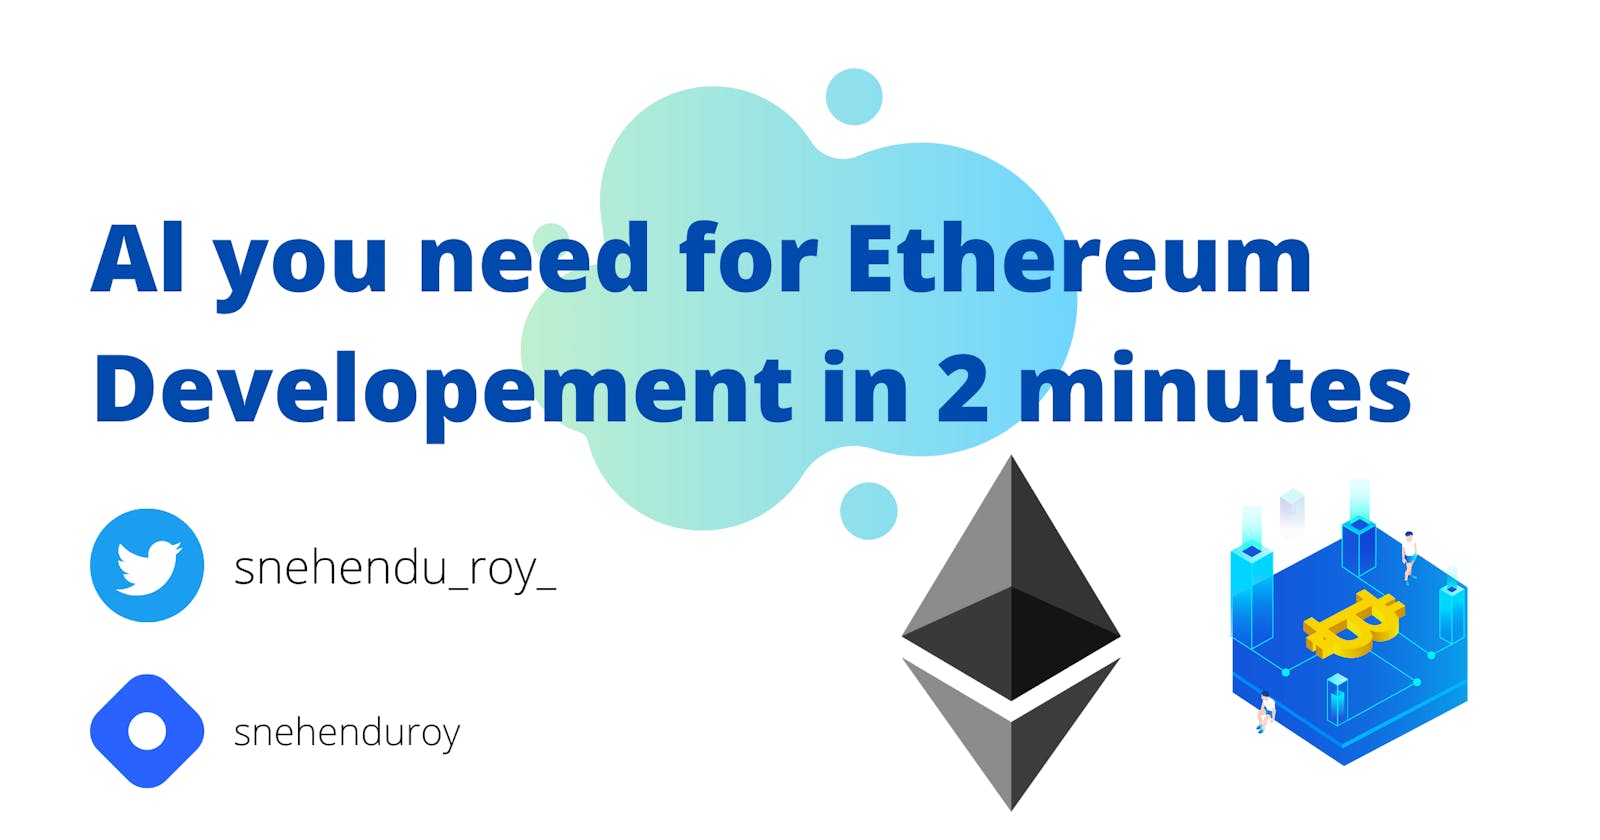 All you need for Ethereum Developement